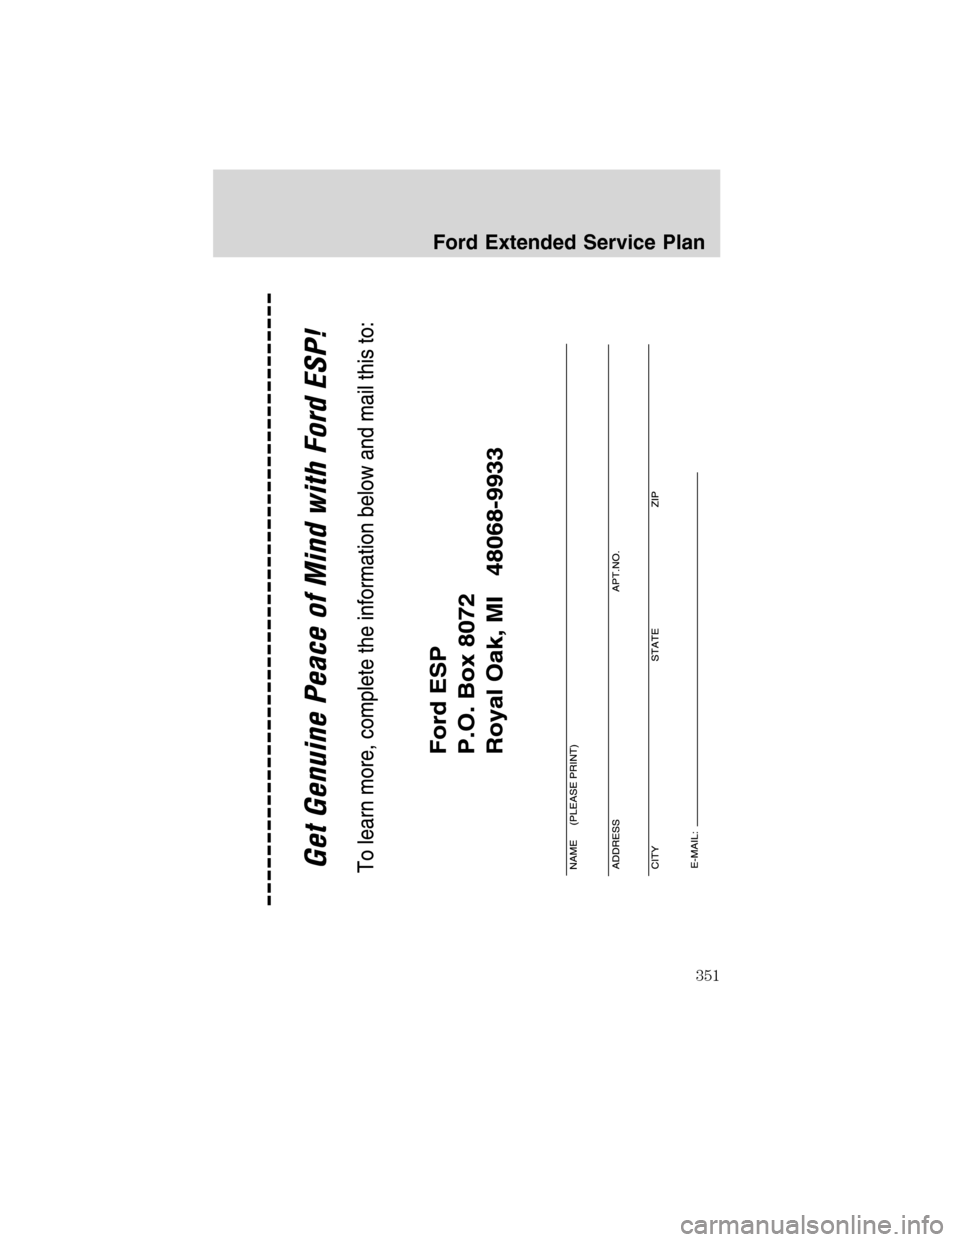 LINCOLN MKS 2010  Owners Manual Ford Extended Service Plan
351
2010 MKS(mks)
Owners Guide(own2002), 1st Printing
USA(fus) 